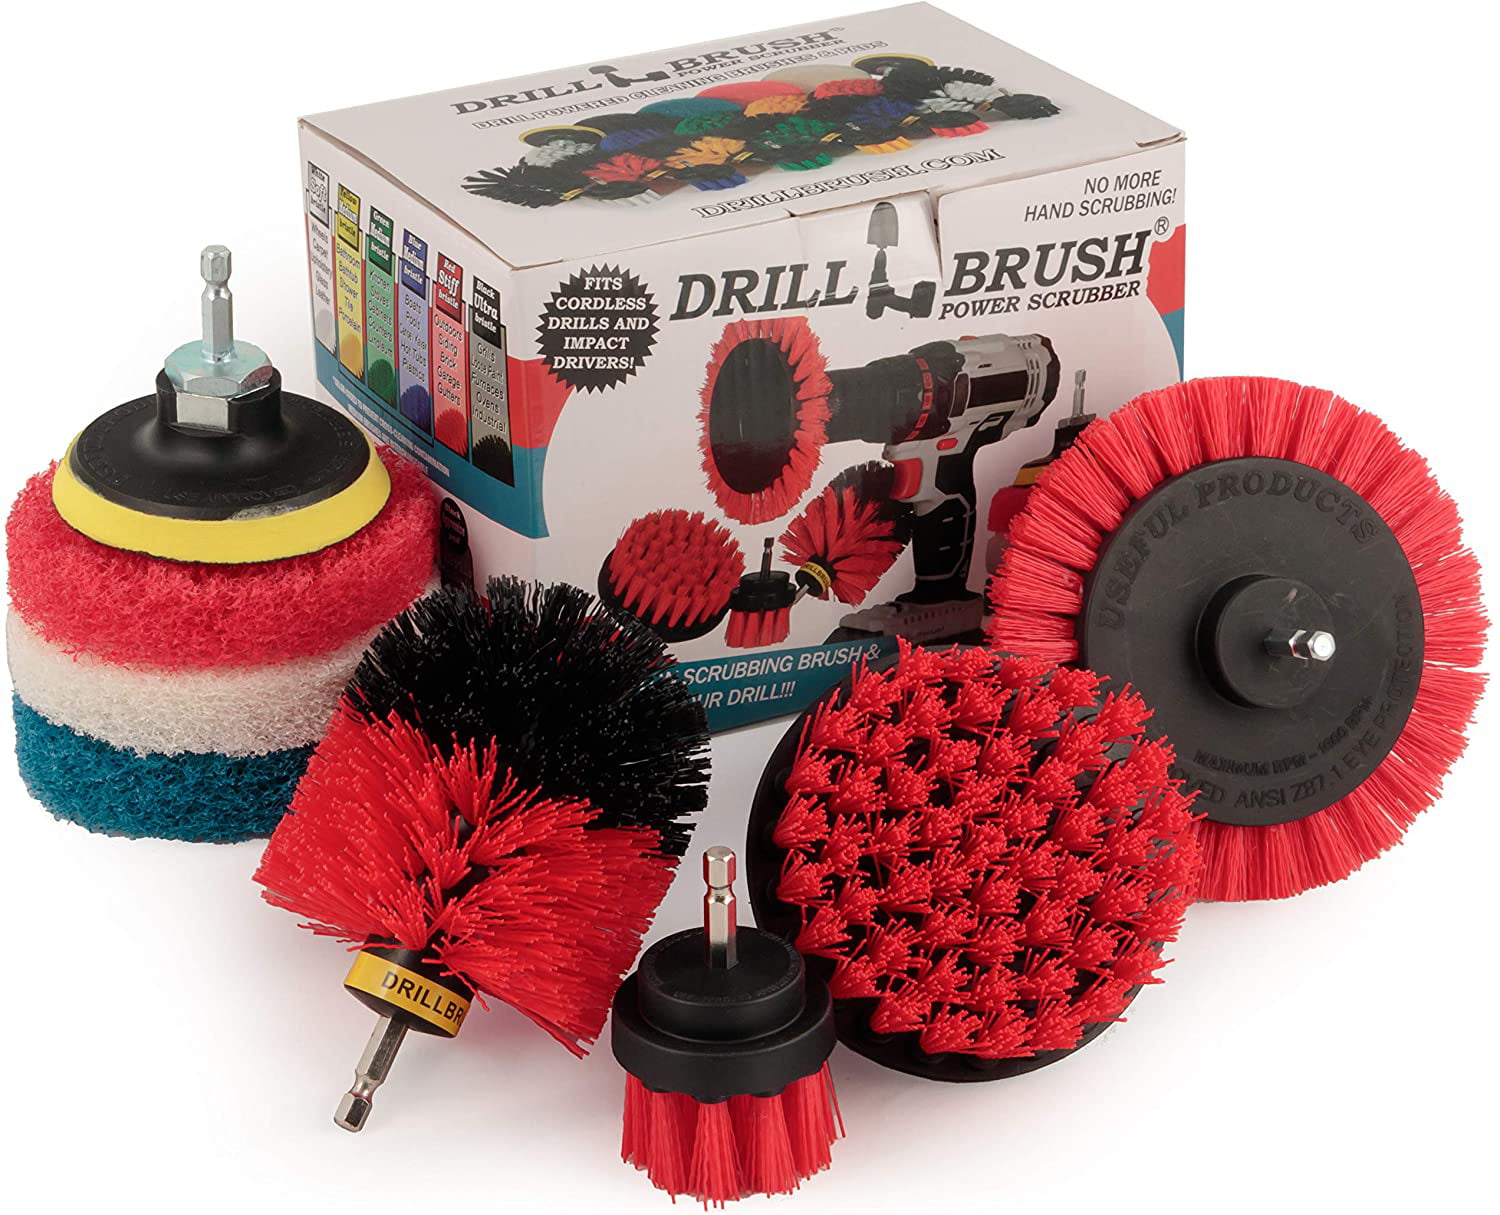 Drillbrush Rotary Brush Kit - Drill Brush Scrub Pads - Shower Scrubbing  Brushes for Cordless Drill - Tile Cleaner Drill Attachment Commercial  Scouring